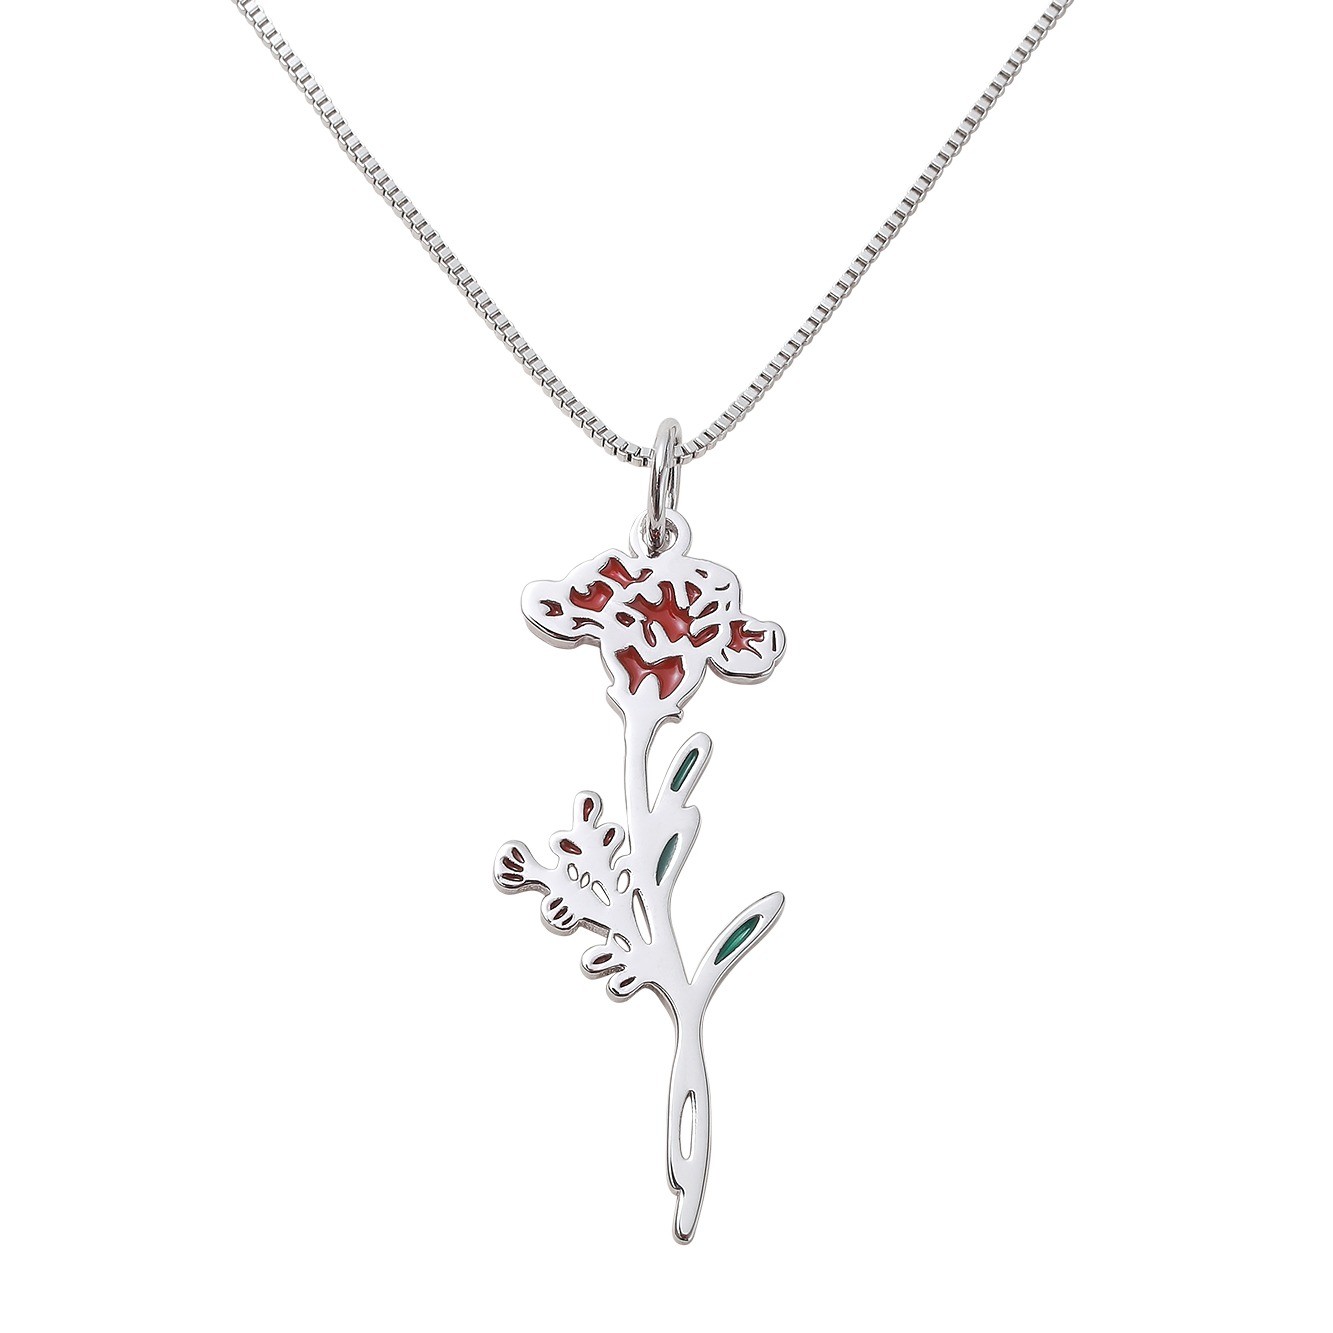 Custom Birth Flowers Bouquet Necklace, Sterling Silver 925 Floral Jewelry, Mother's Day/Birthday Gift for Mom/Grandma from Daughter/Granddaughter